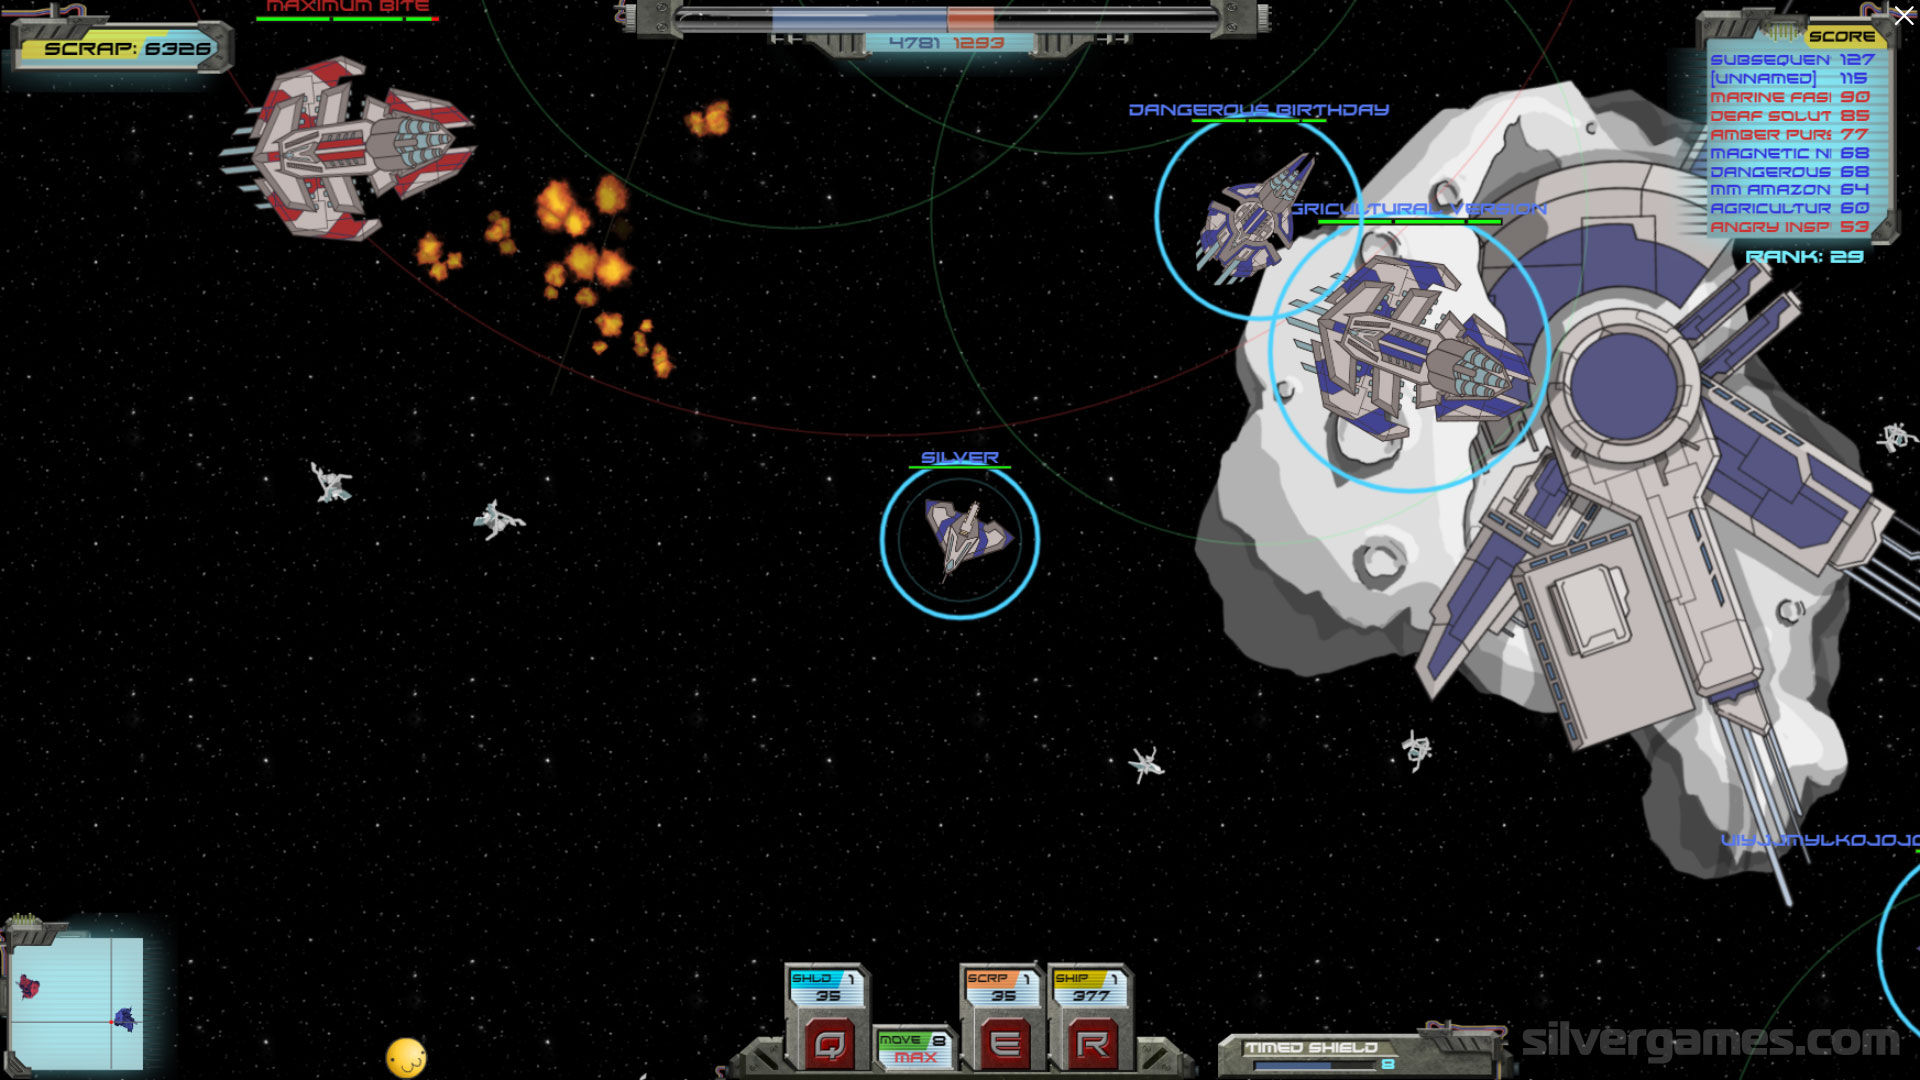 warin.space - Play war in space Free Online Game